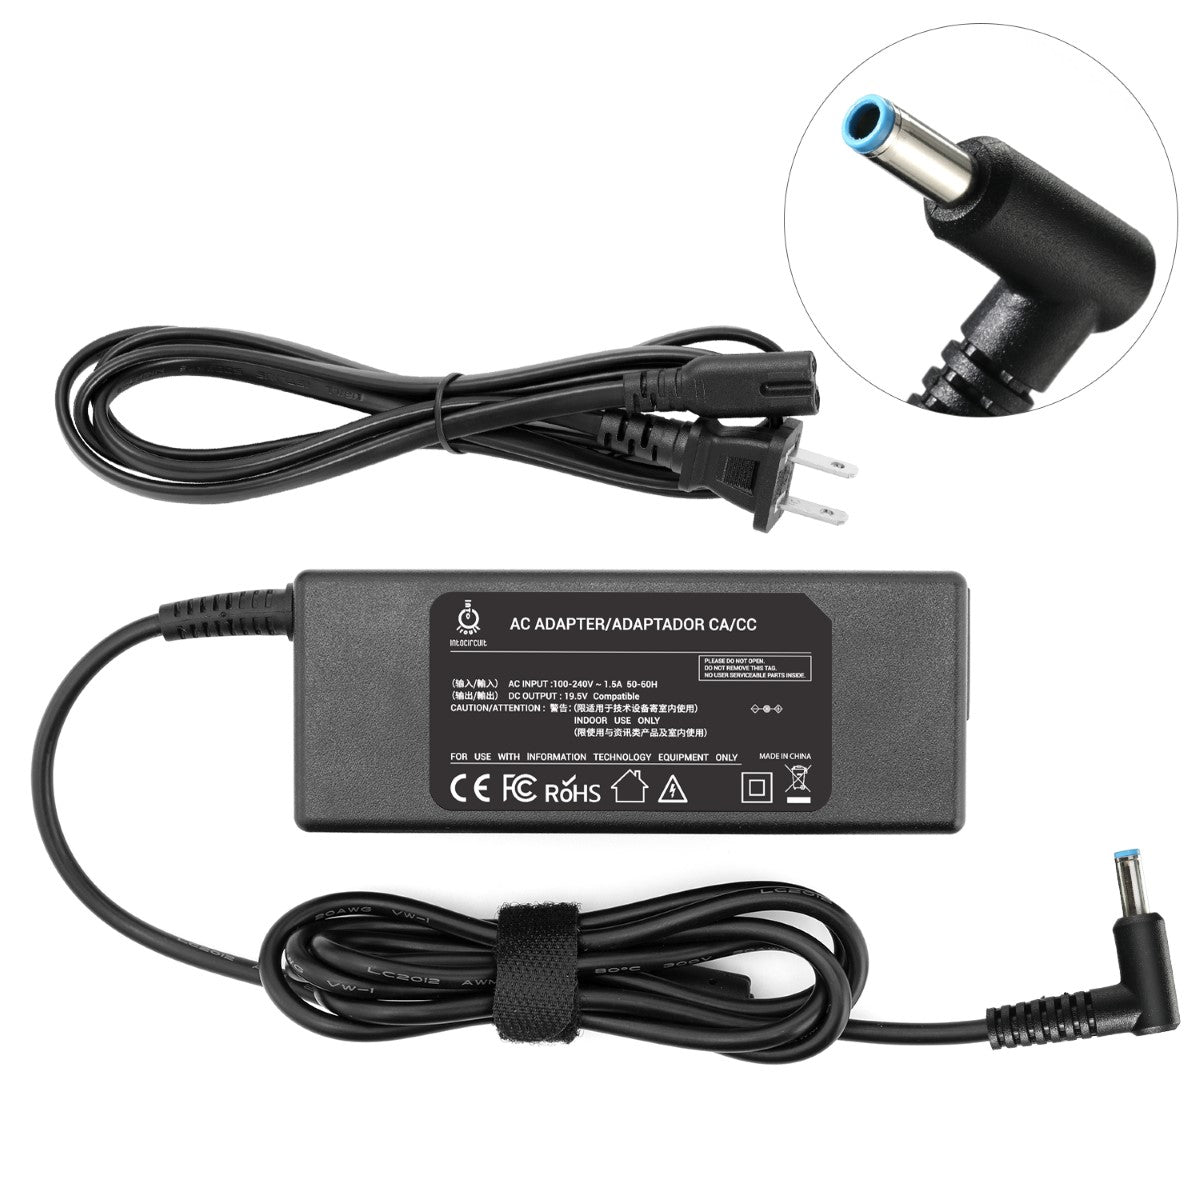 Charger for HP 13-4100dx Spectre x360 Laptop